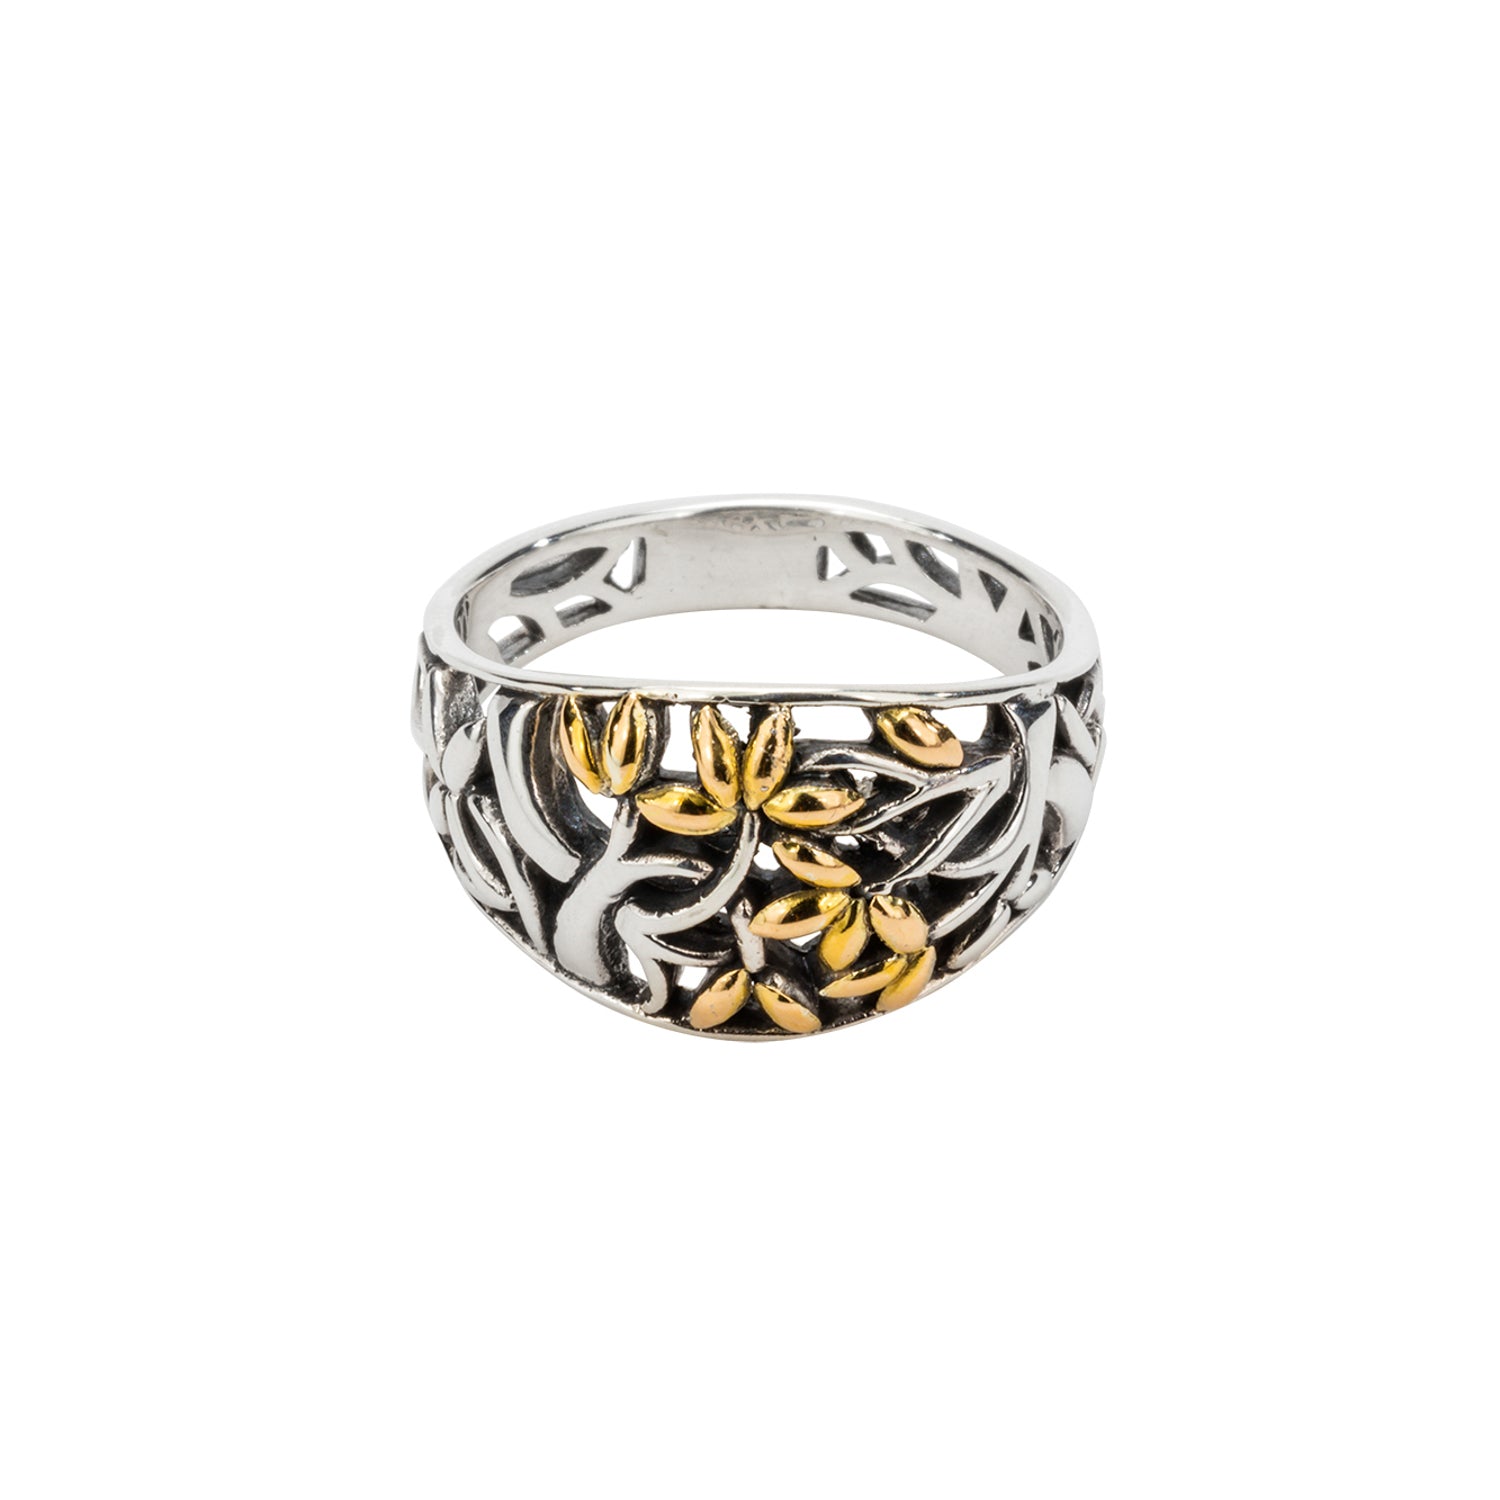 Ring Bands 18k Tree of Life Ring (Tapered) from welch and company jewelers near syracuse ny 